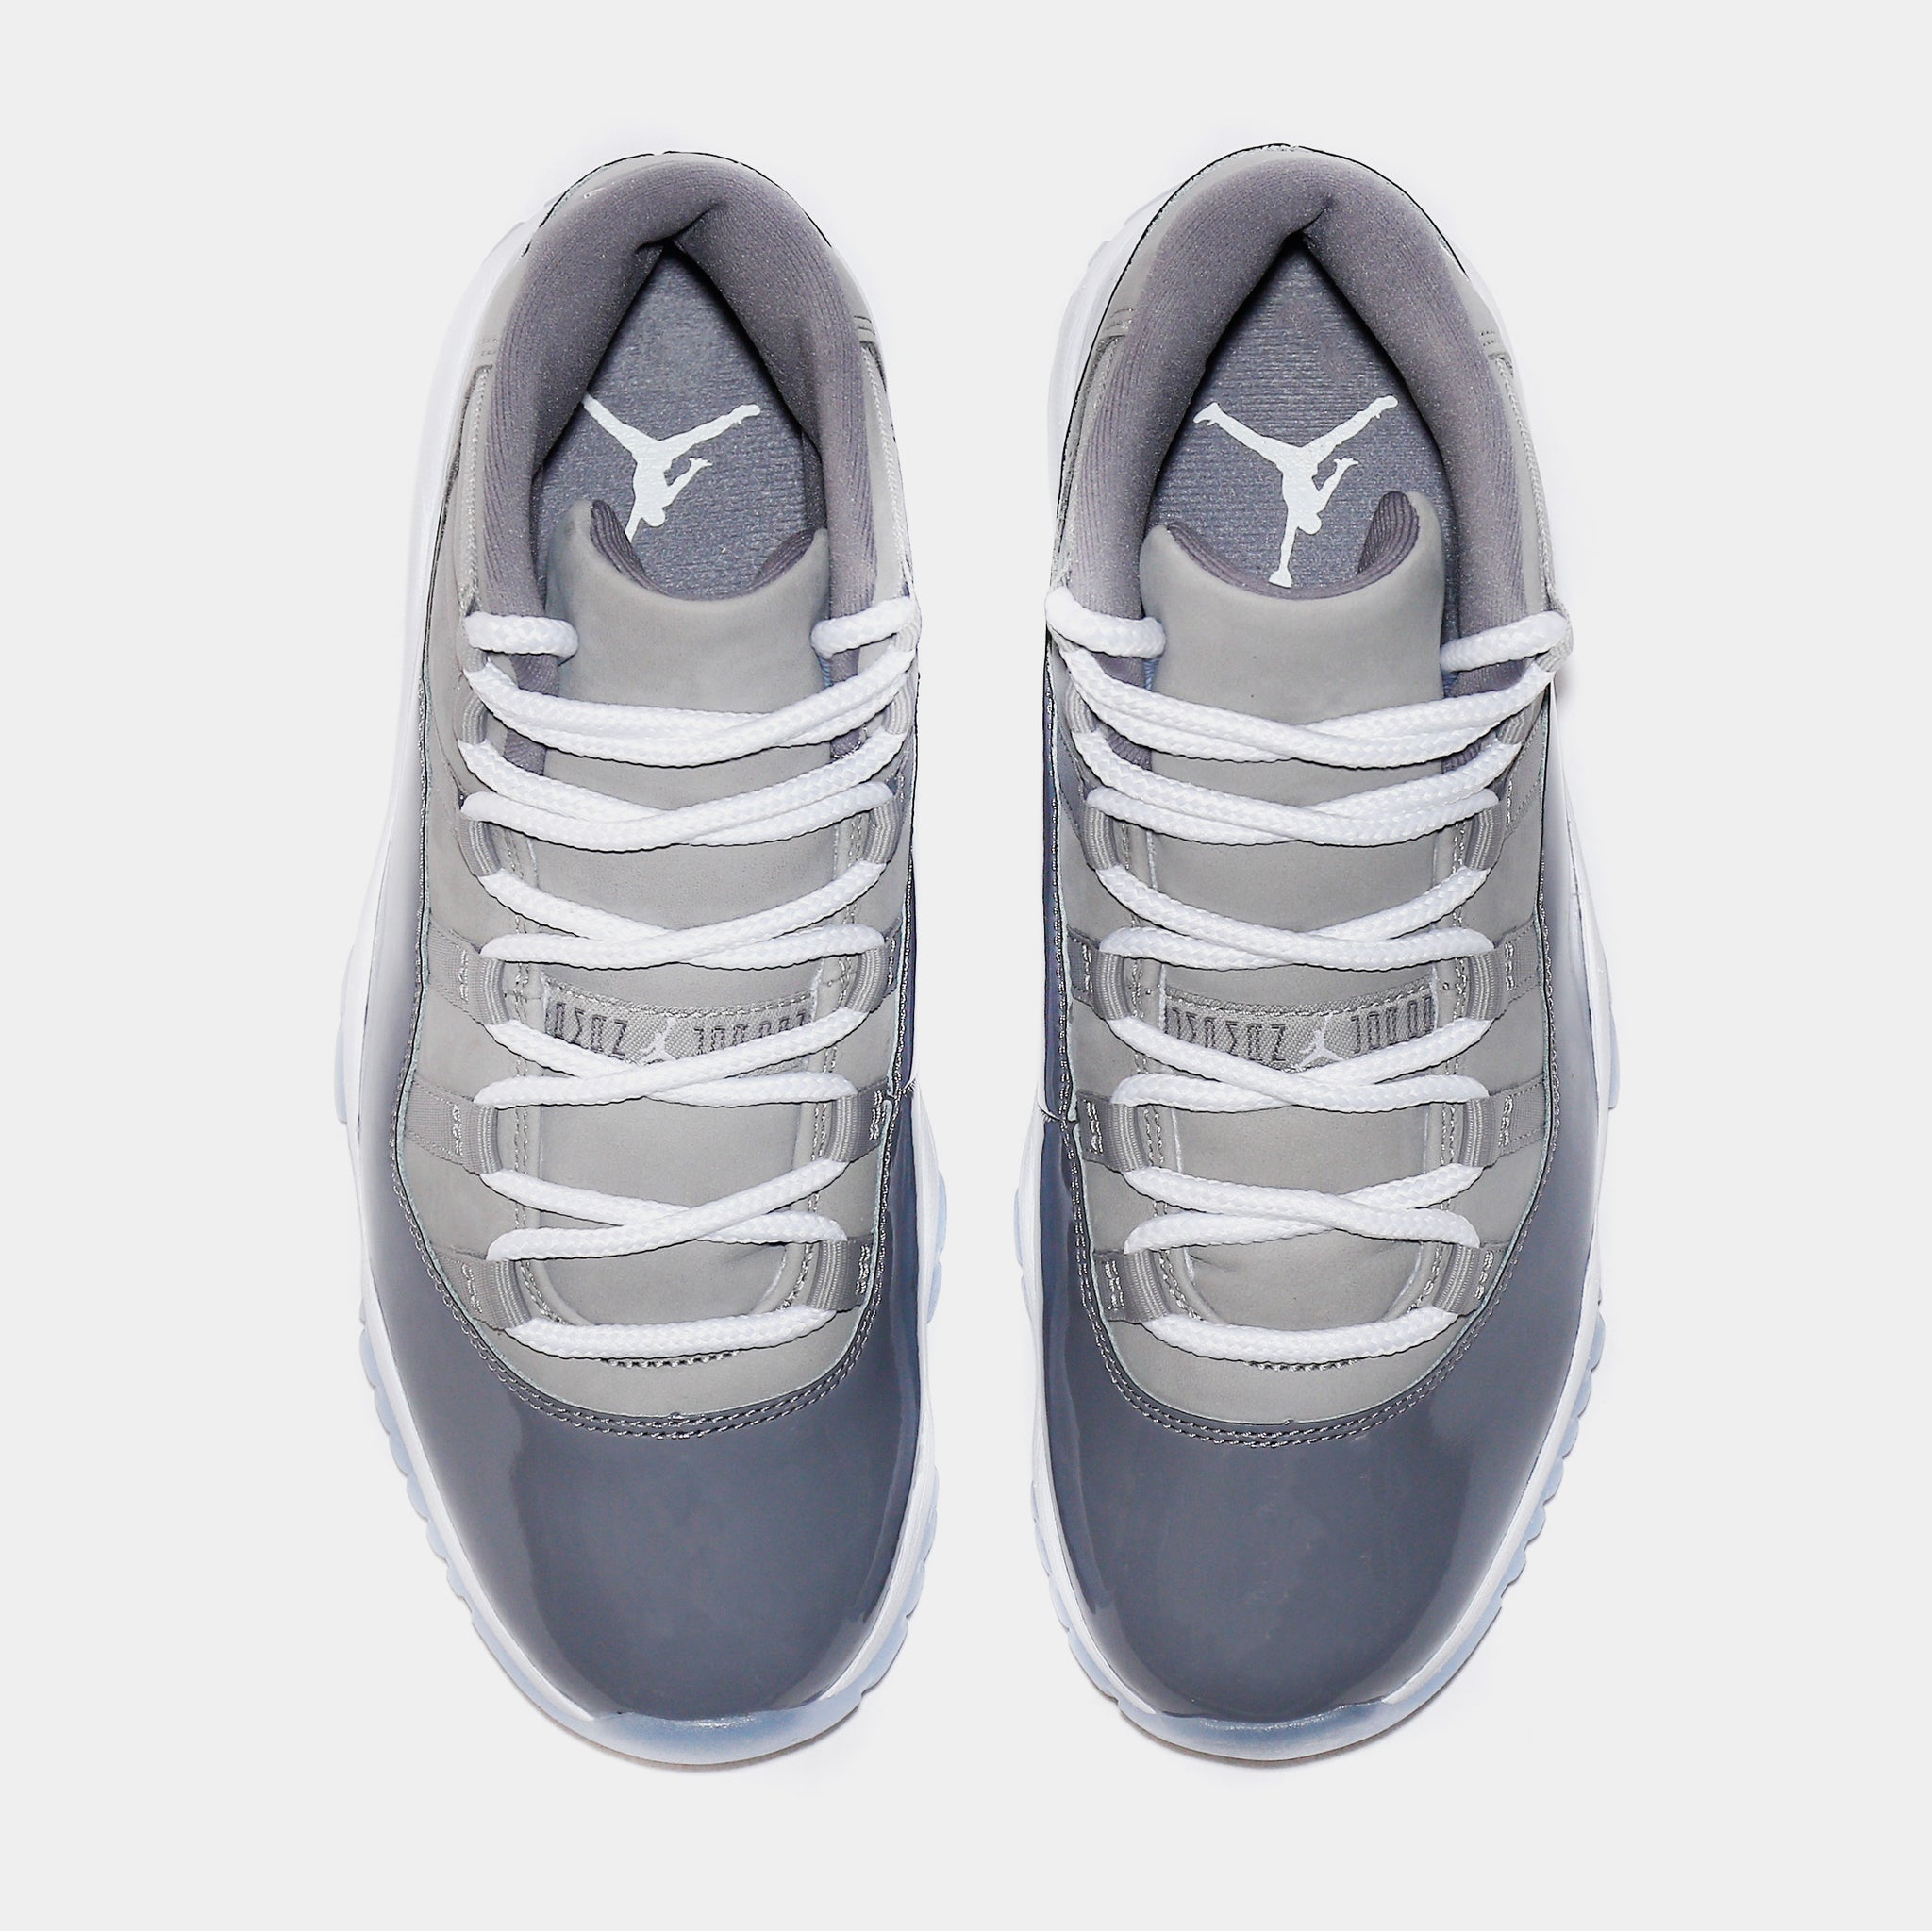 Air Jordan 11 Retro “Cool Grey” size 7-13 from Amyhushoes : r/AmyHuSneakers